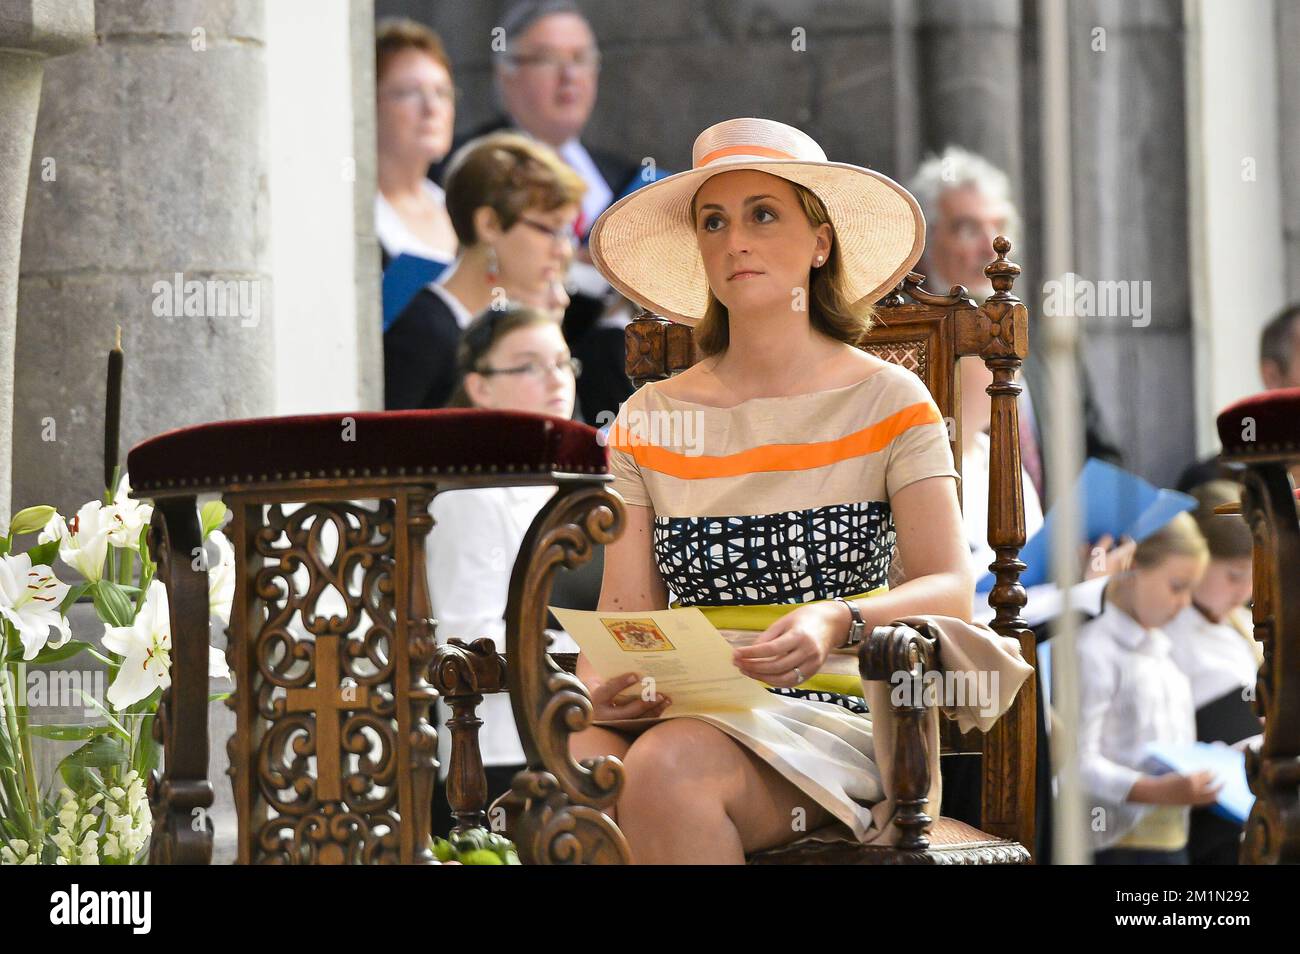 20120721 - LIEGE, BELGIUM: Princess Claire of Belgium pictured during the Te Deum mass, on the occasion of today's Belgian National Day, at the Cathedrale Saint-Paul (Sint-Pauluskathedraal) cathedral, Saturday 21 July 2012 in Liege. BELGA PHOTO NICOLAS LAMBERT Stock Photo